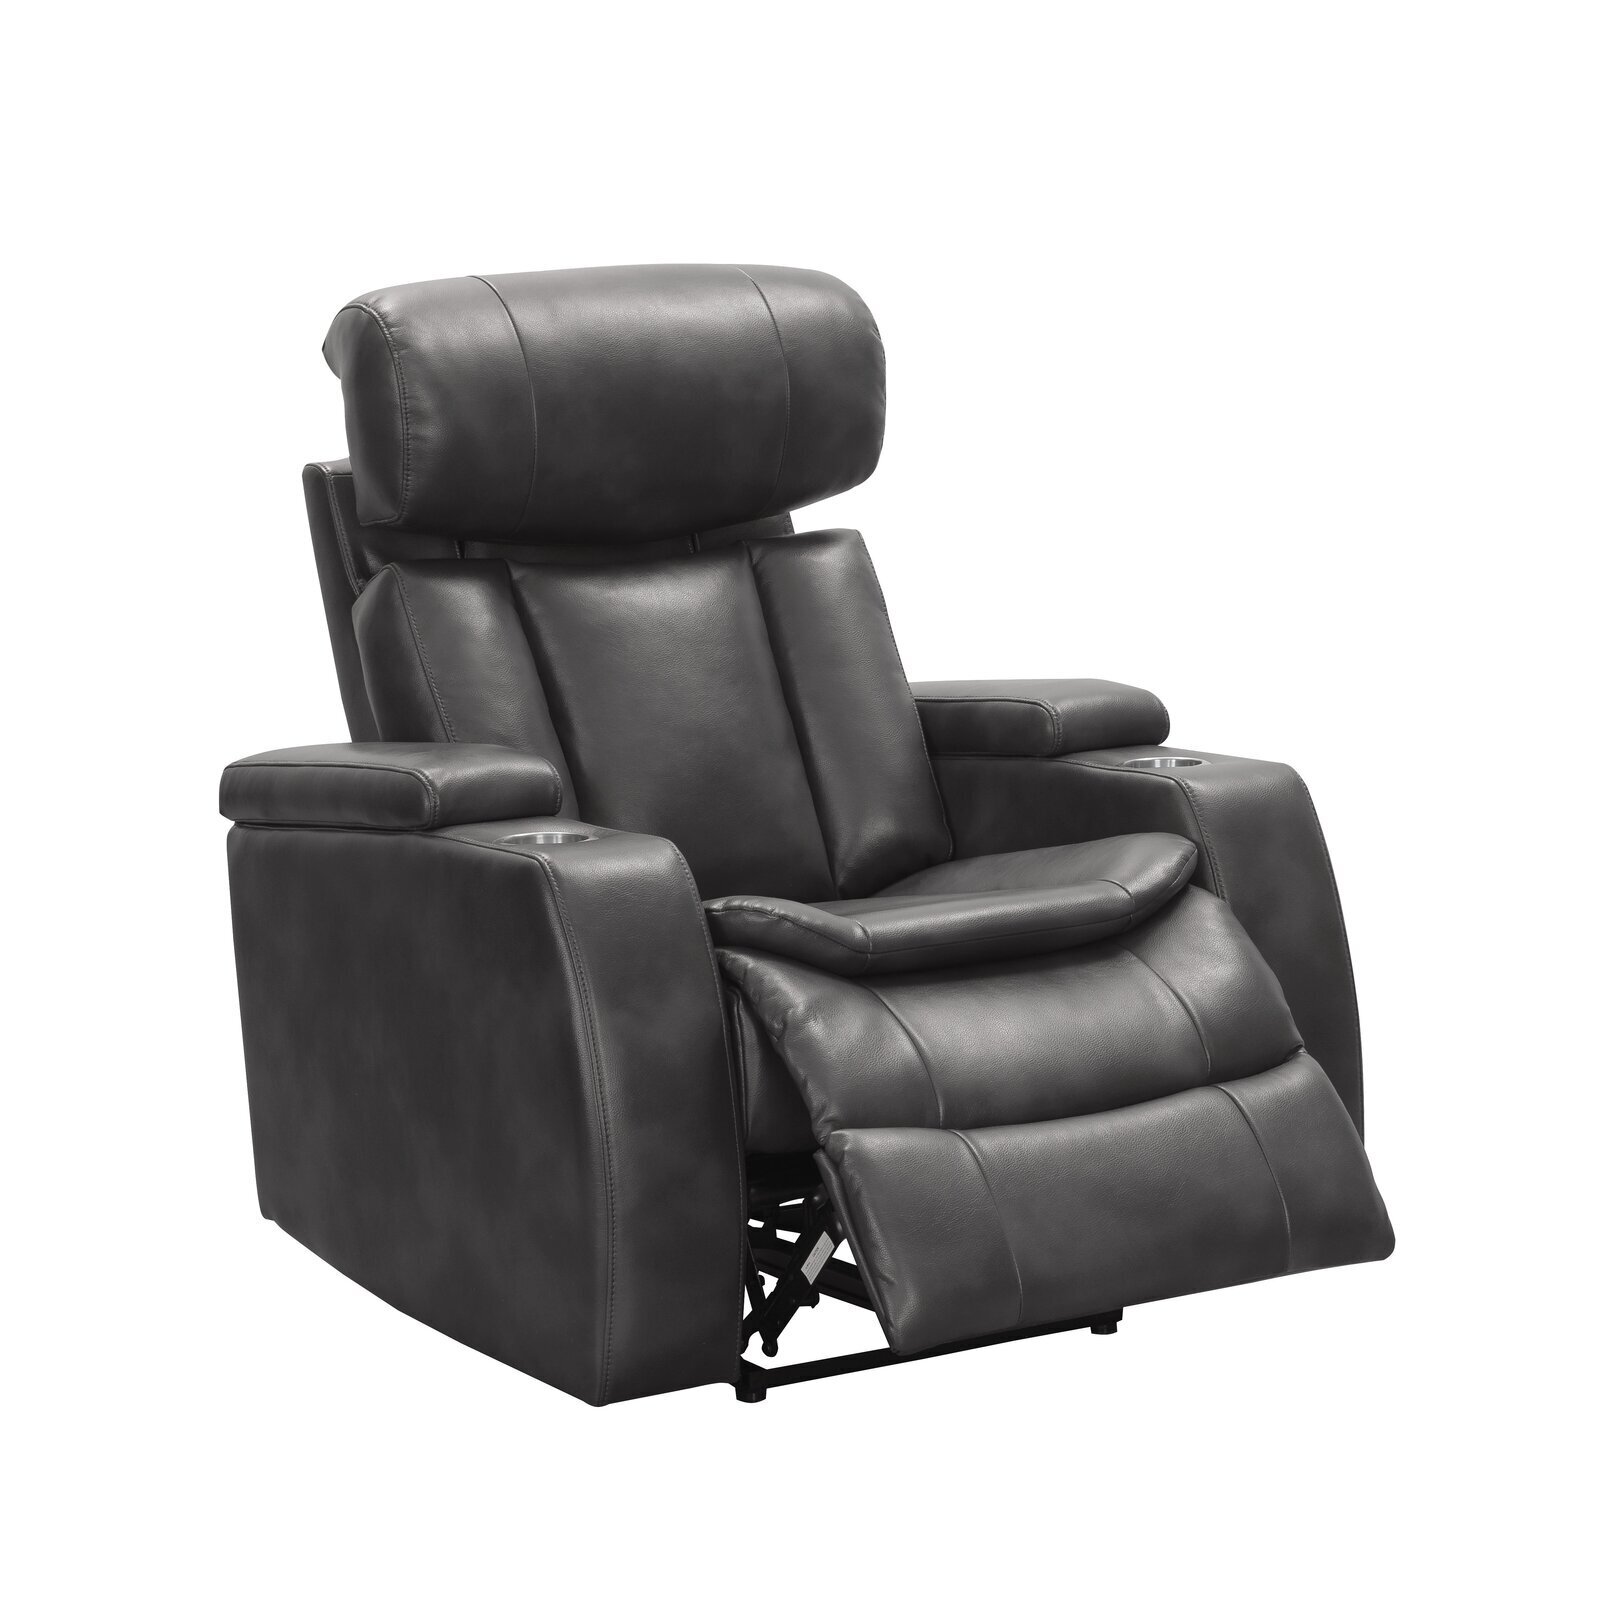 Genuine Leather Recliner With Cup Holder